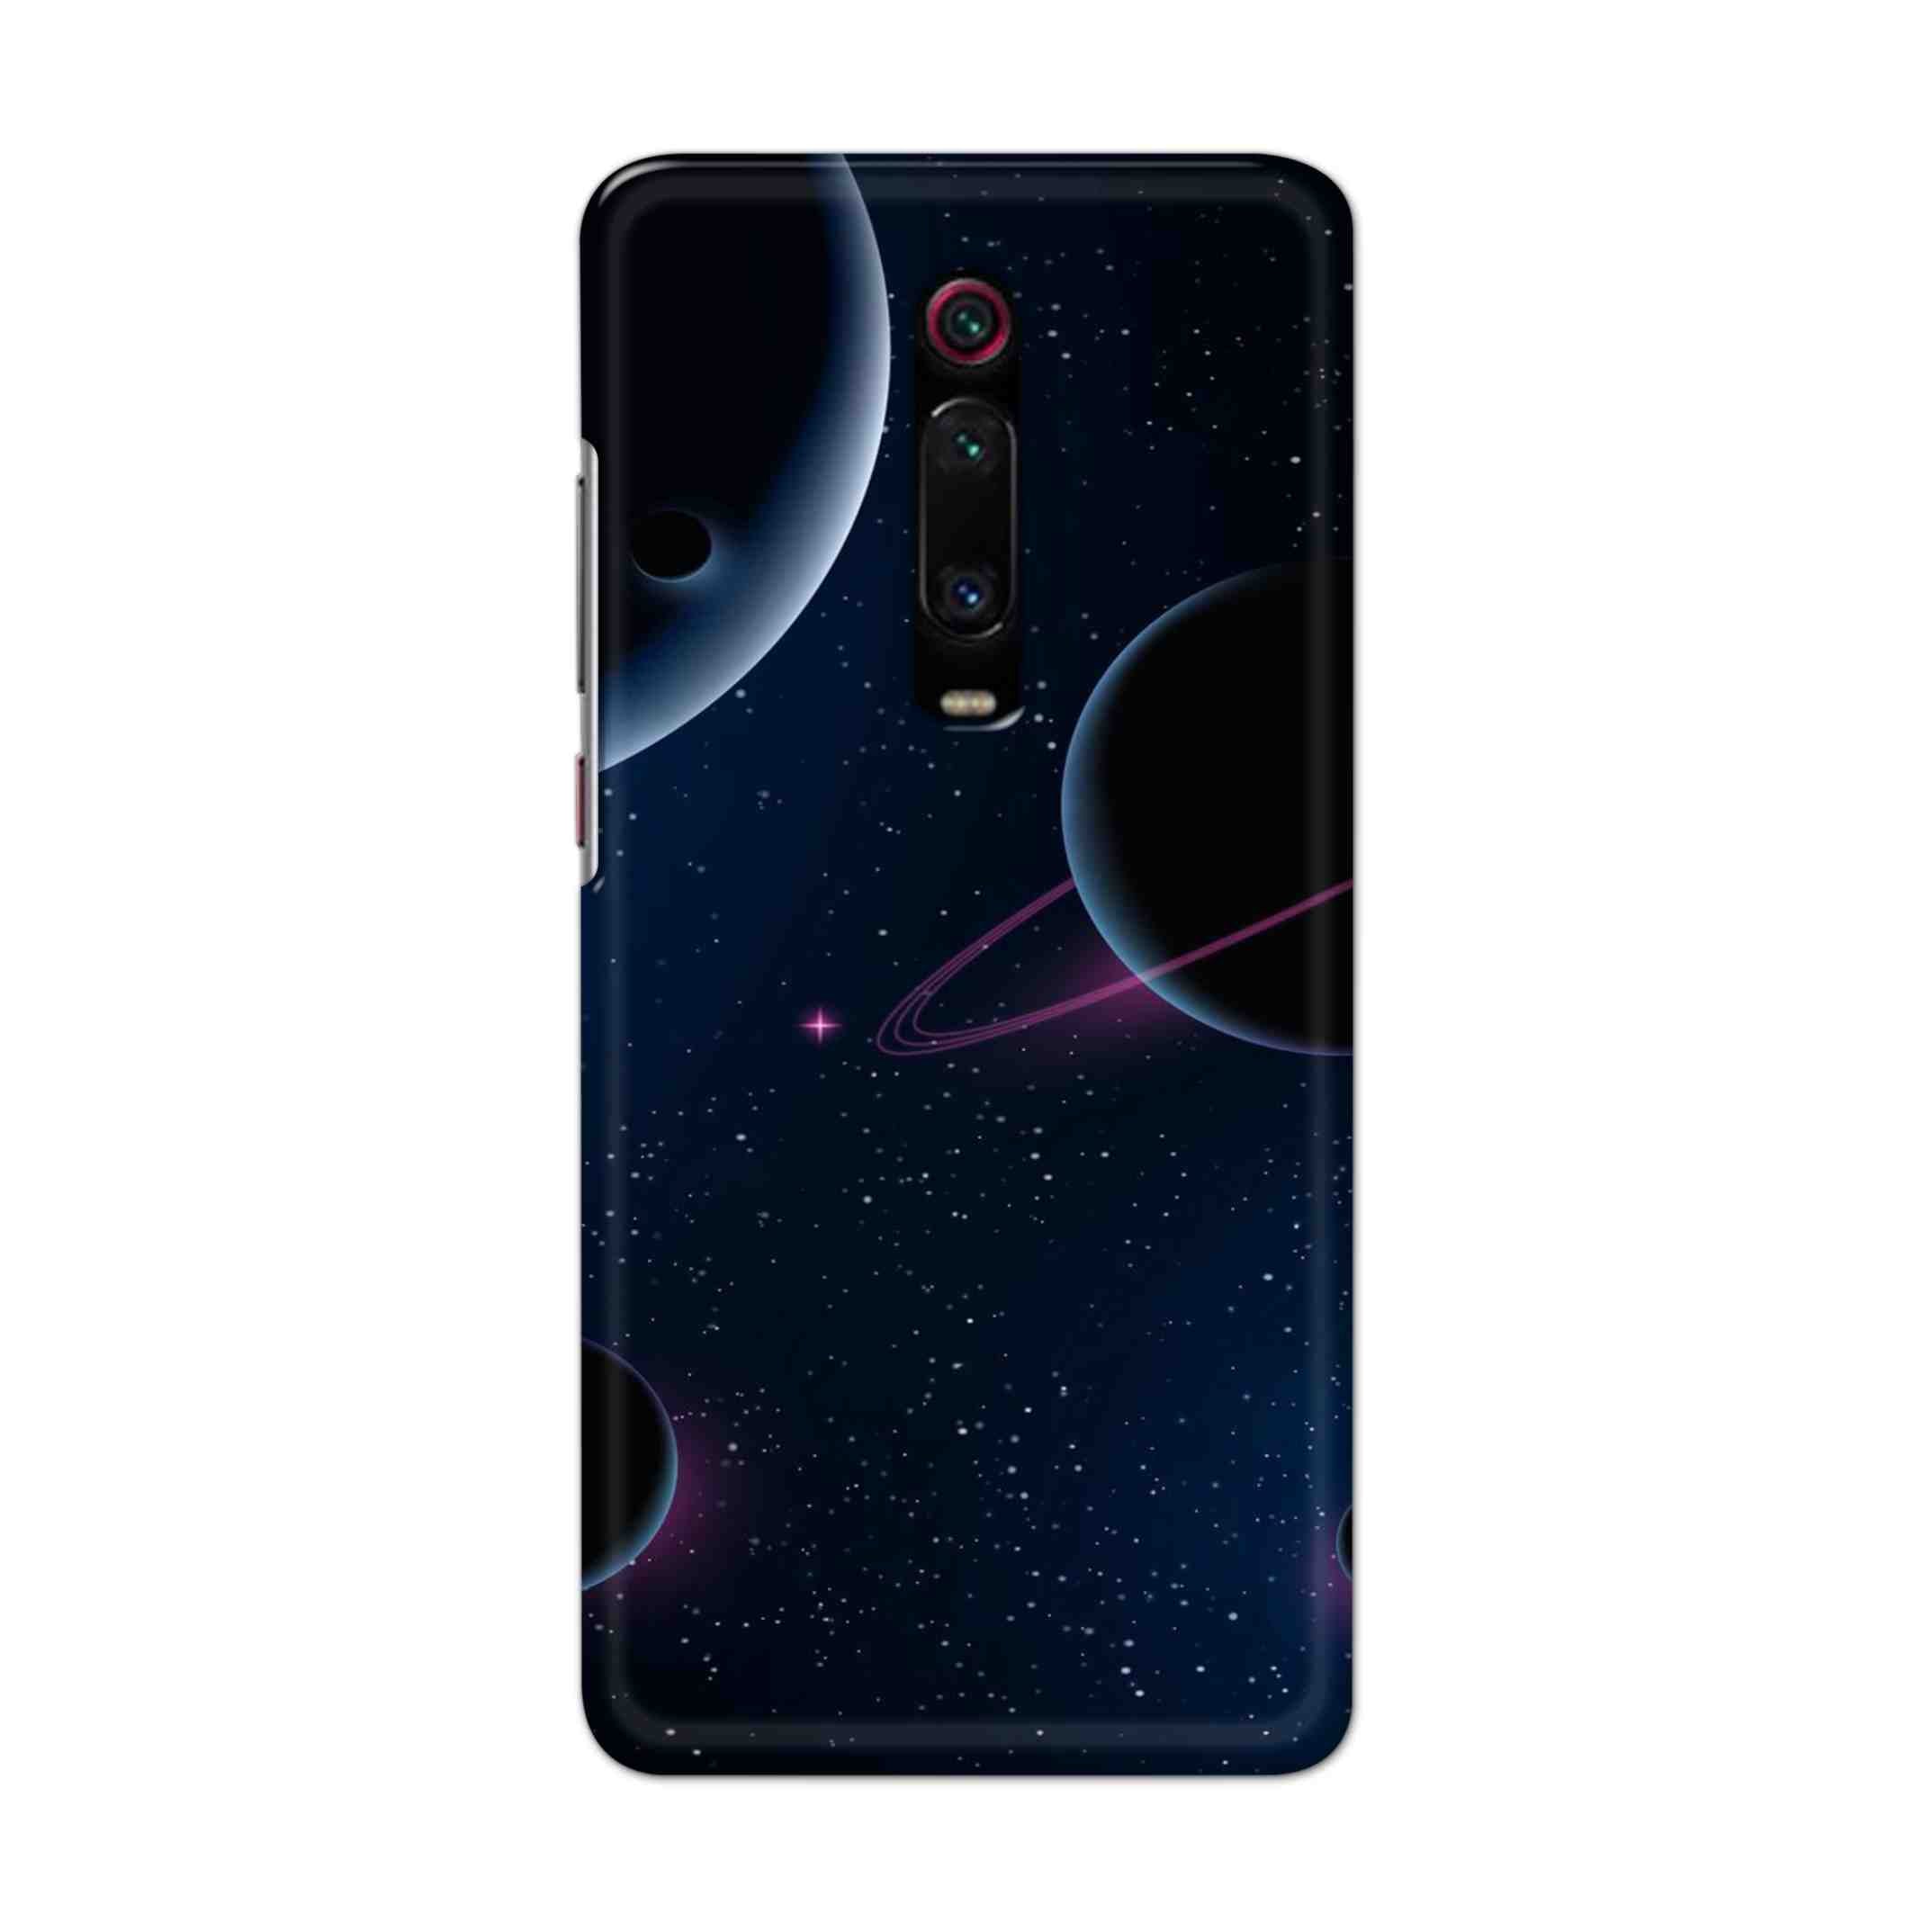 Buy Night Space Hard Back Mobile Phone Case Cover For Xiaomi Redmi K20 Online